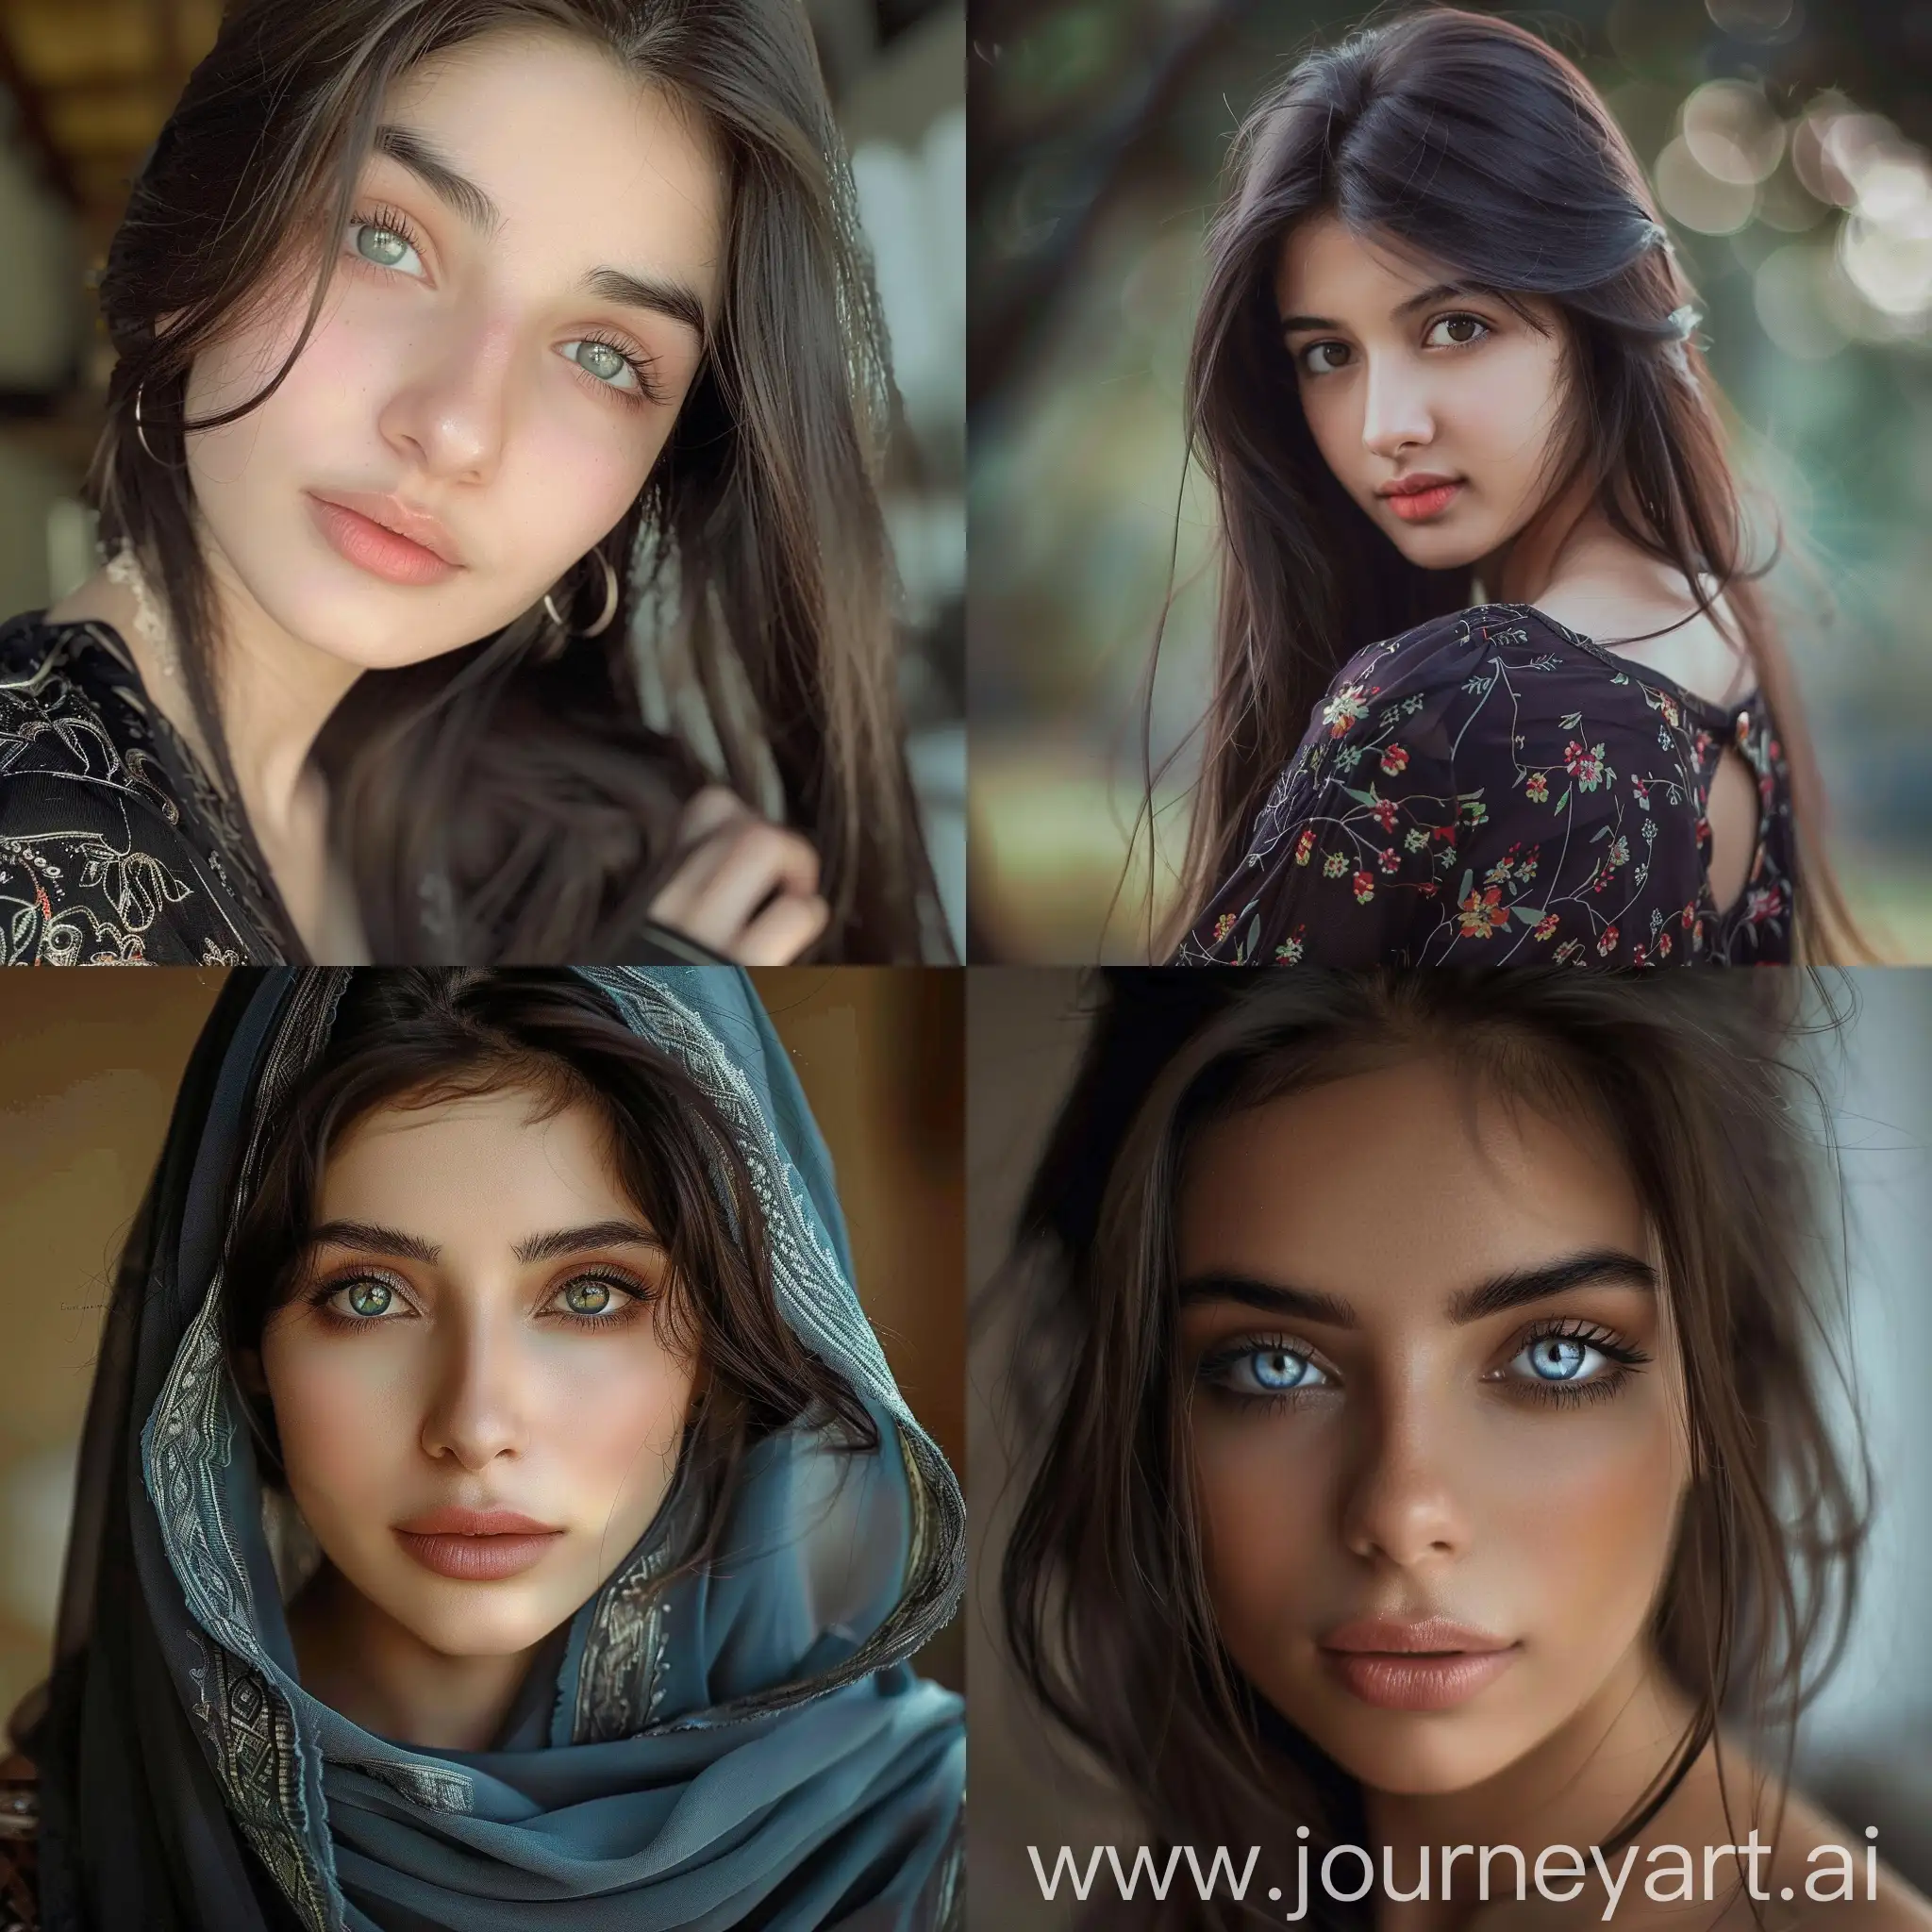 Stunning-Portrait-of-the-Worlds-Most-Beautiful-Girl